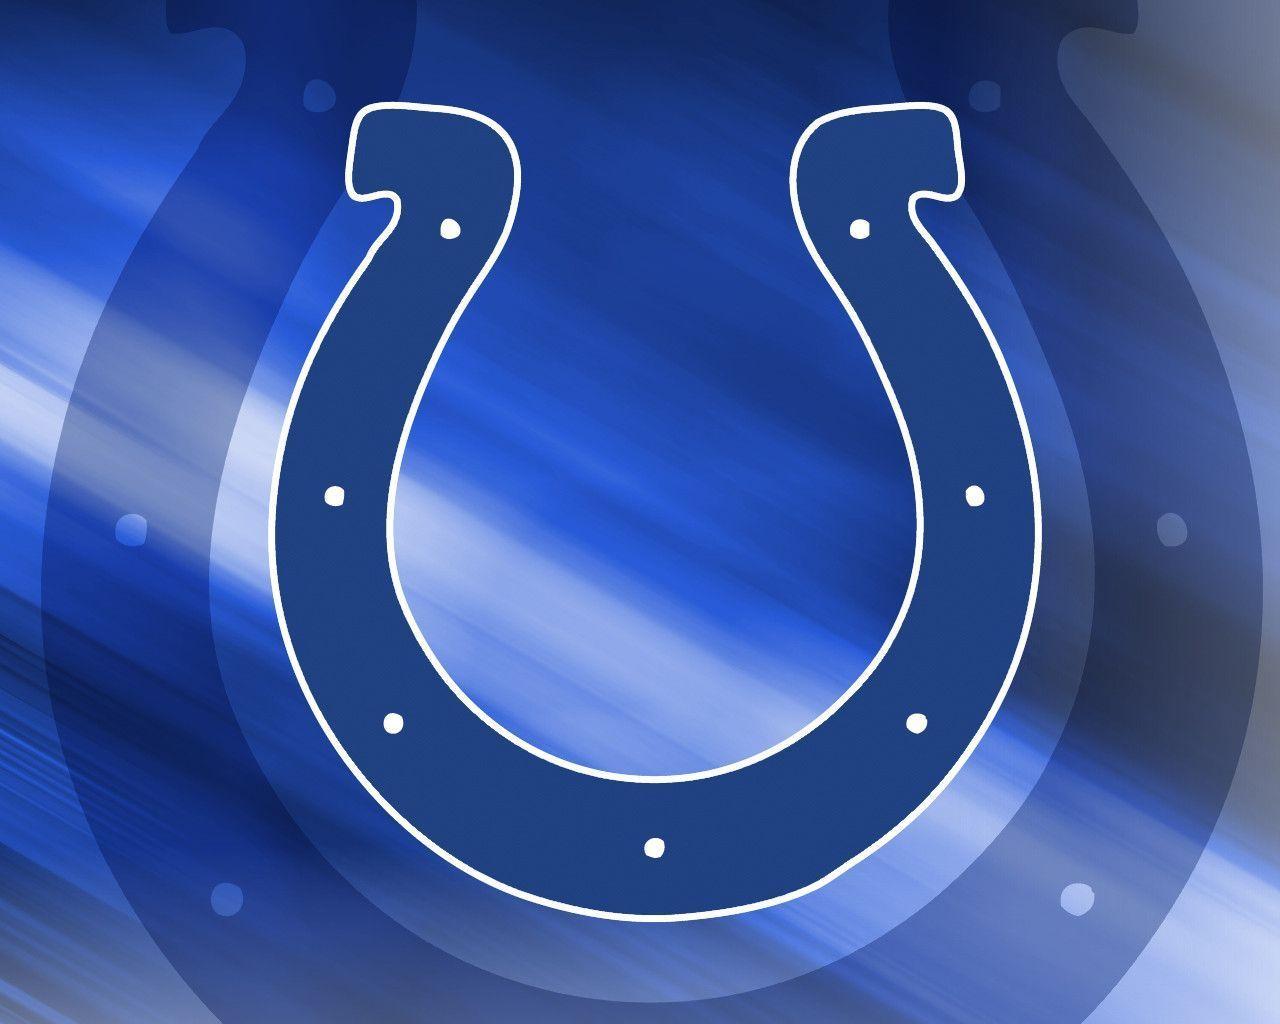 Indianapolis Colts wallpaper. Indianapolis Colts background